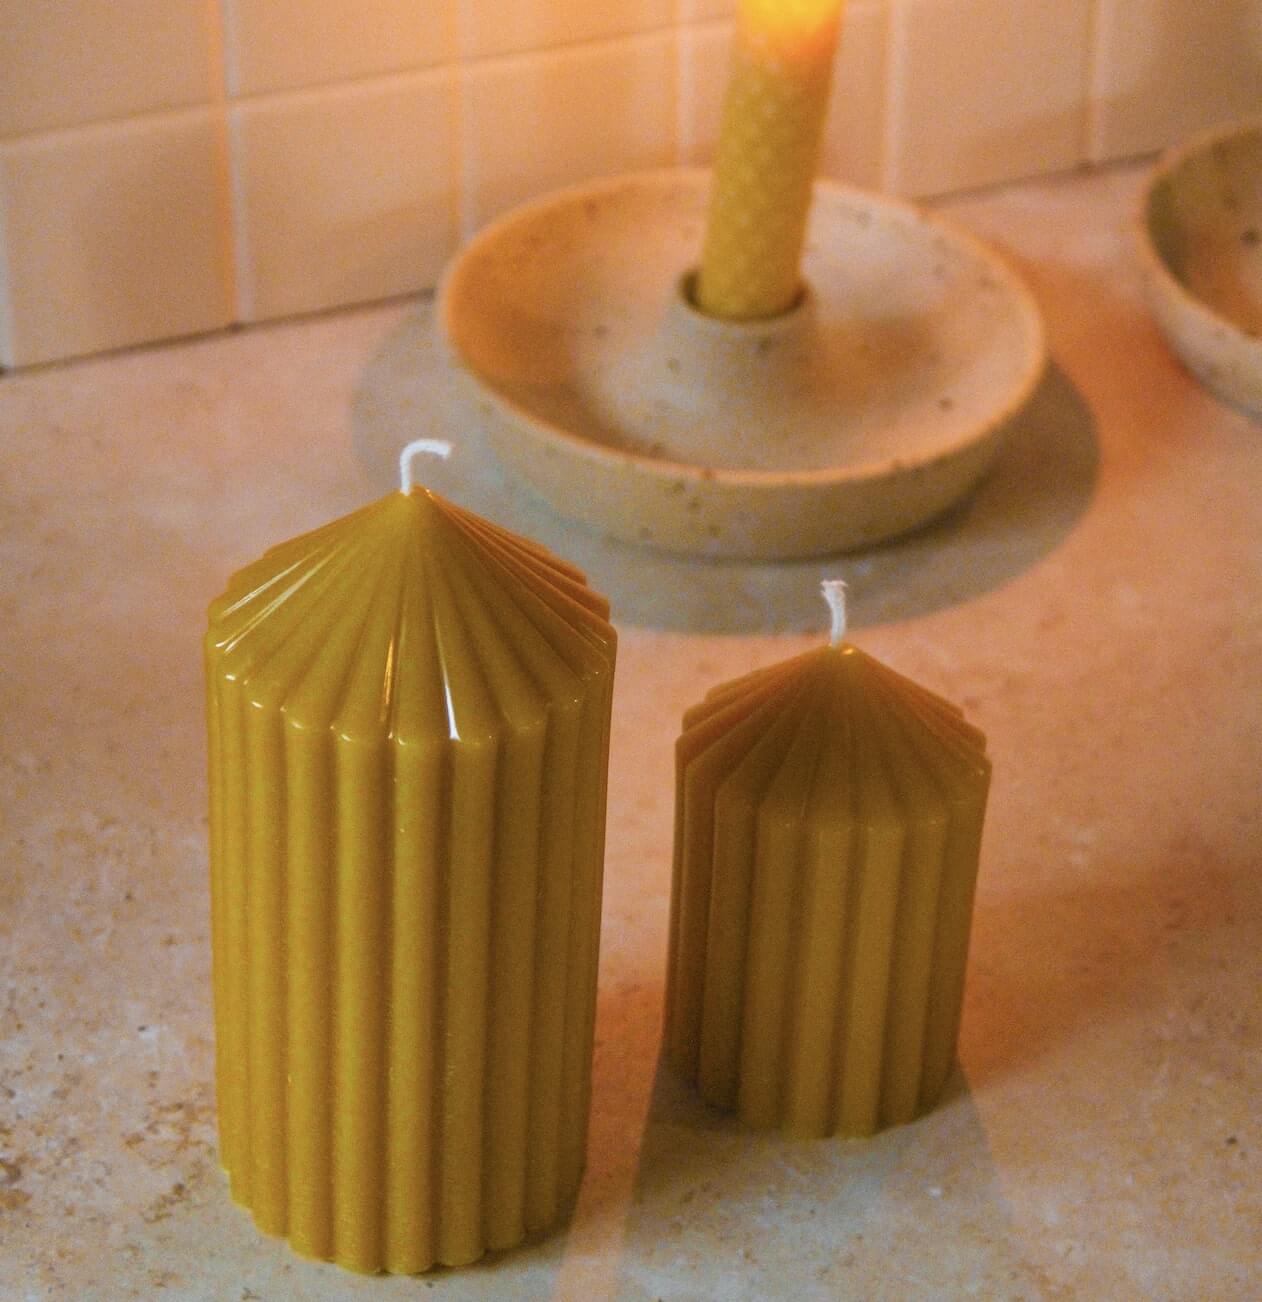 Pillar Candle - The Plastic Free Co.